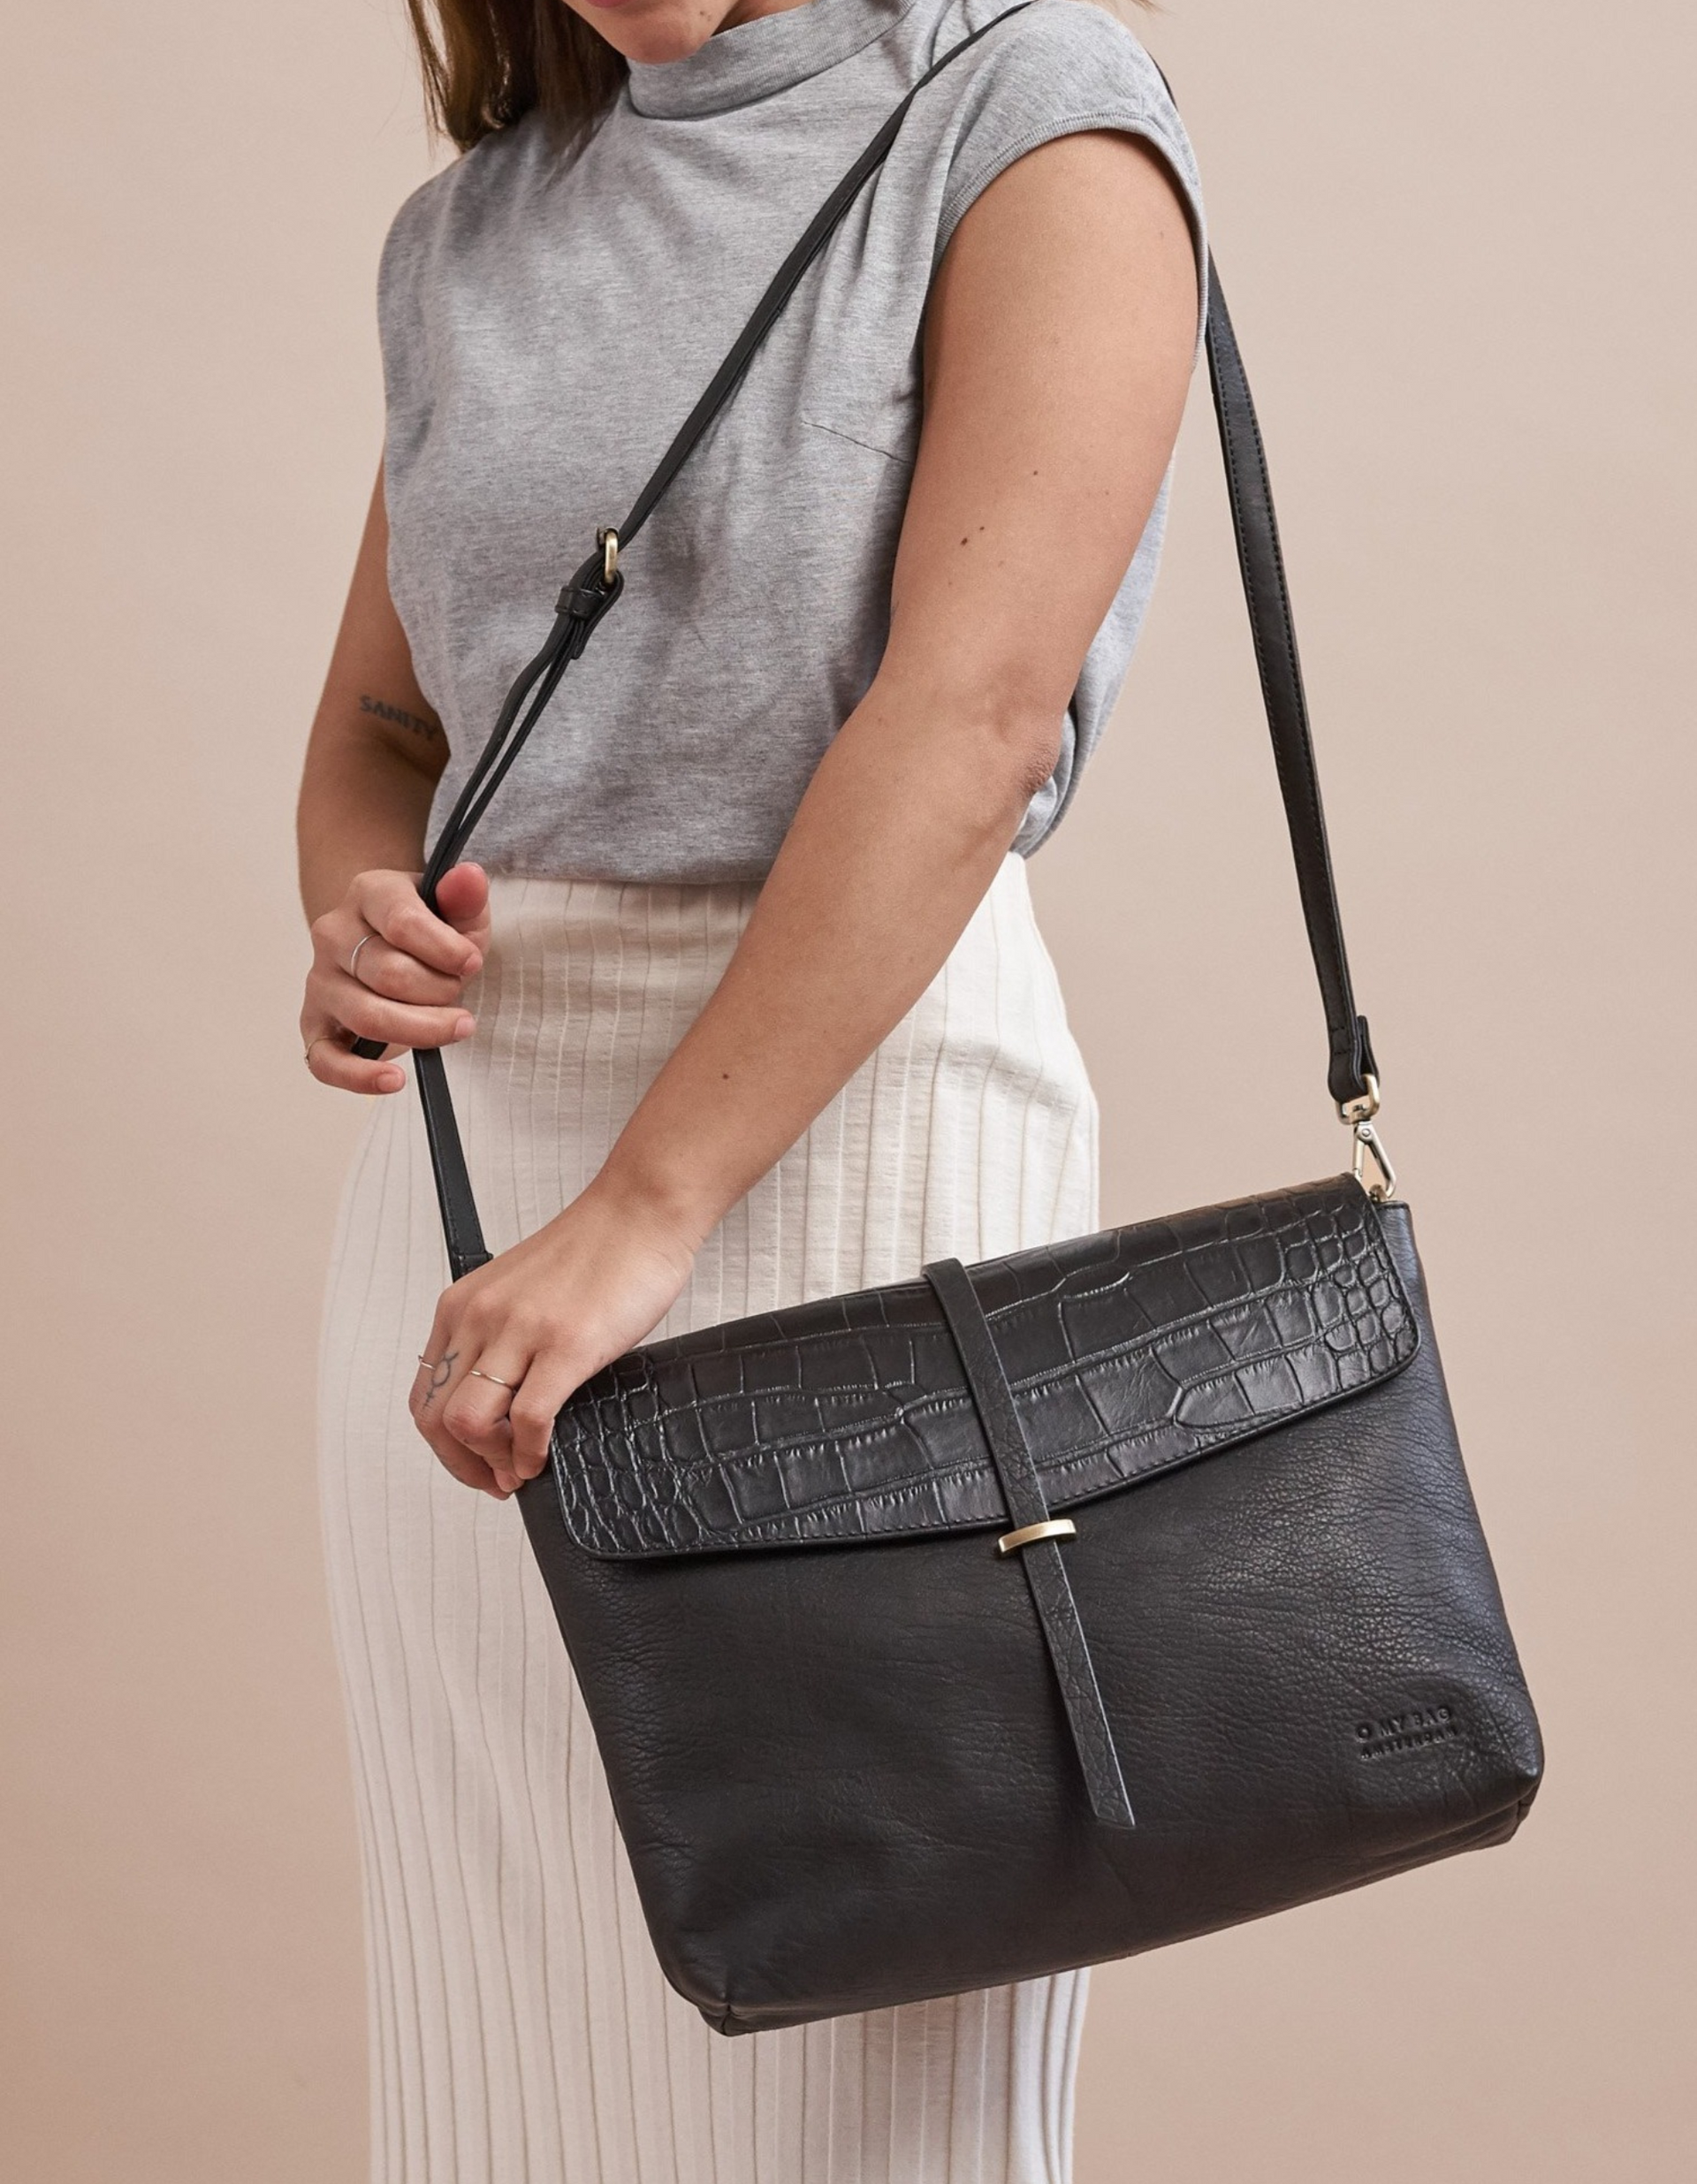 Black Classic Croco leather womens handbag. Square shape with an adjustable strap. Model product image.